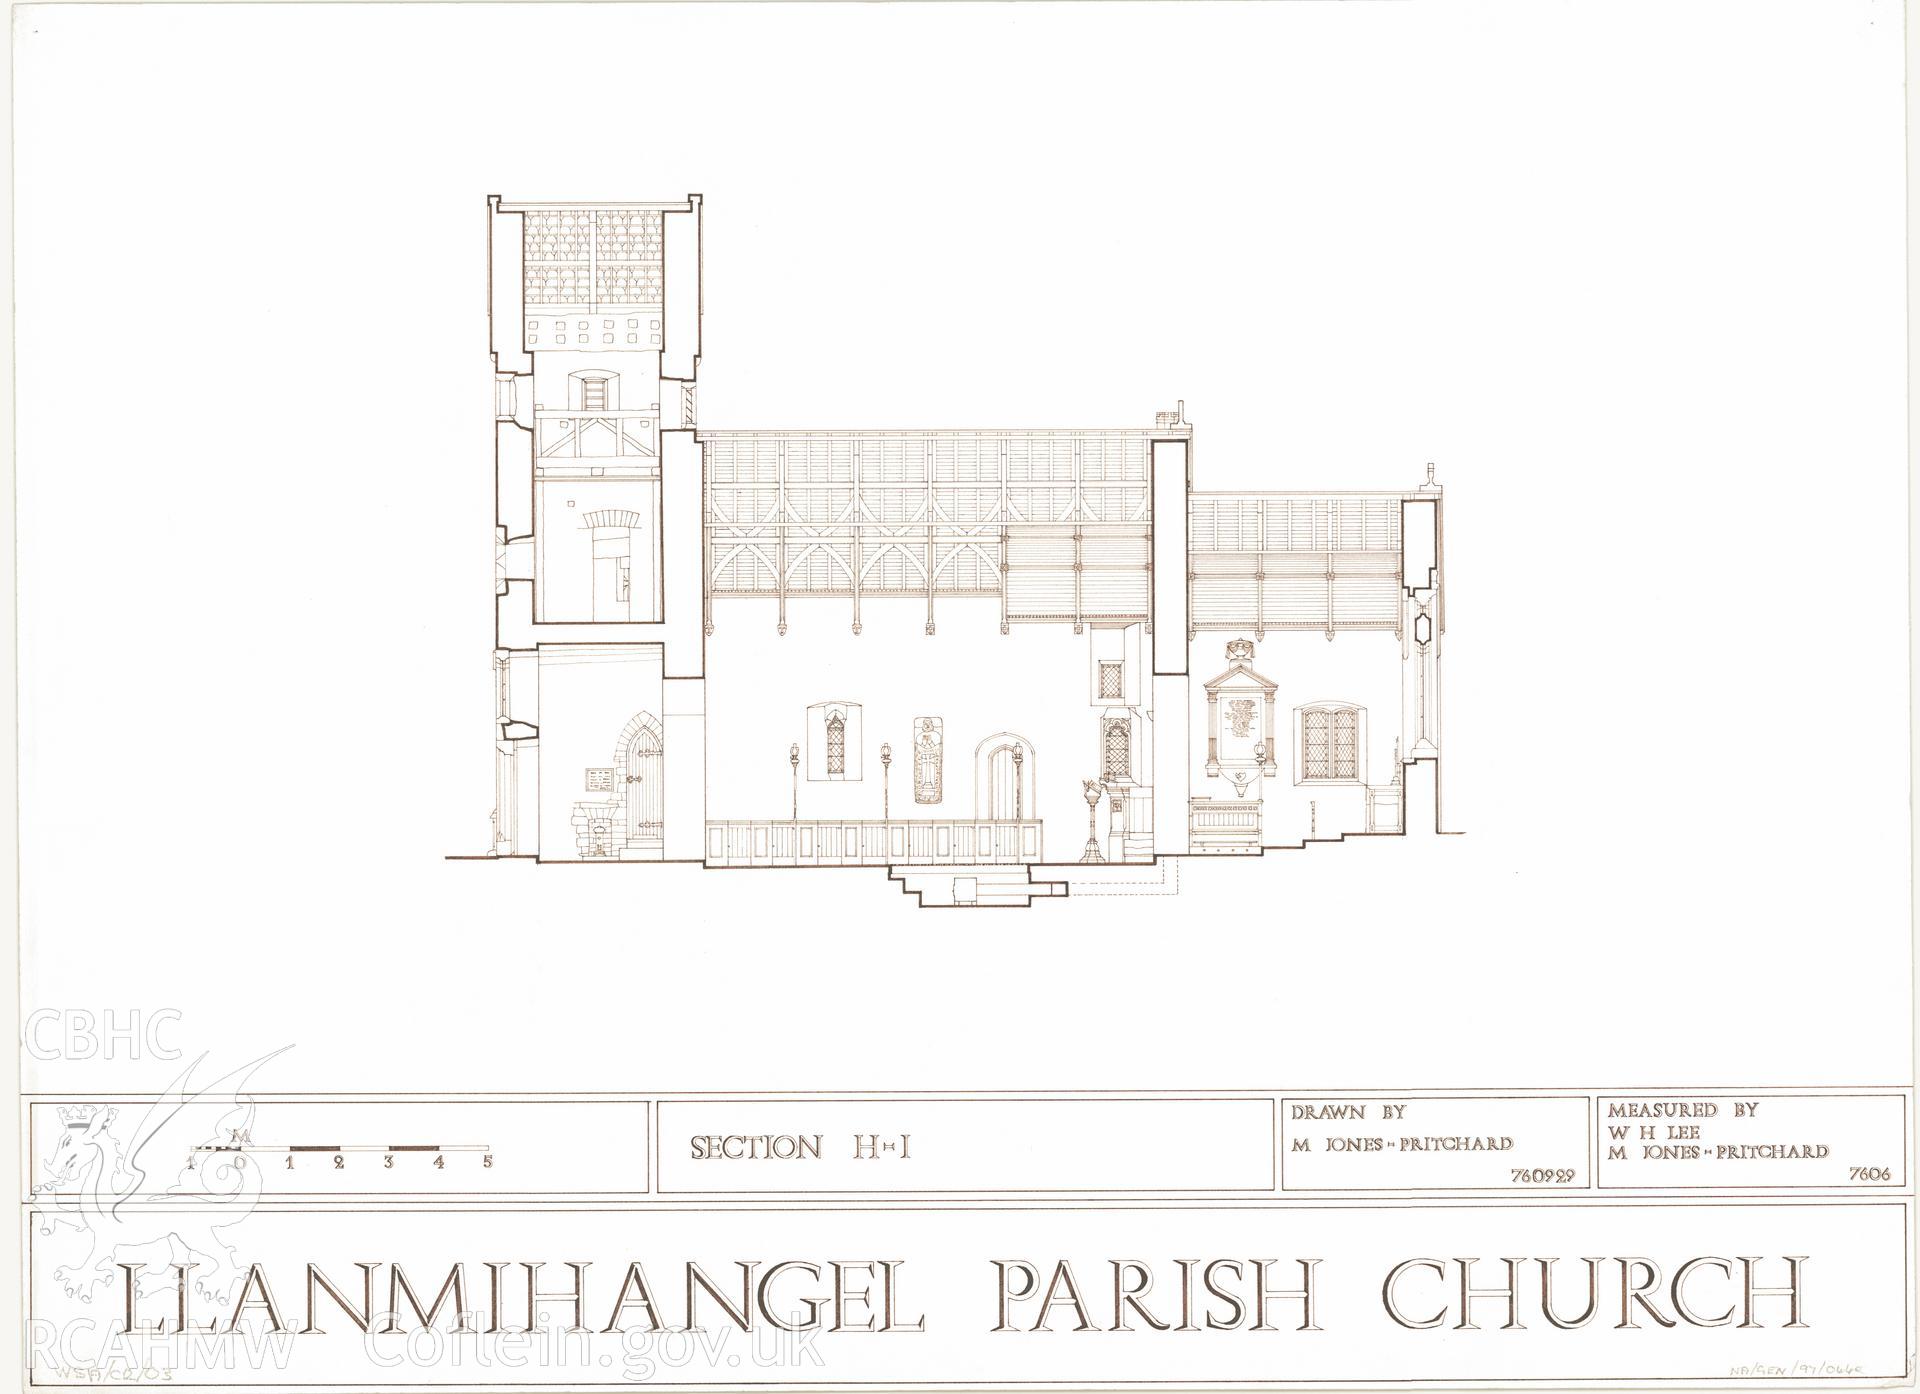 Measured drawing showing section view of Llanmihangel Parish Church, produced by M. Jones-Pritchard and W.H. Lee, 1976.